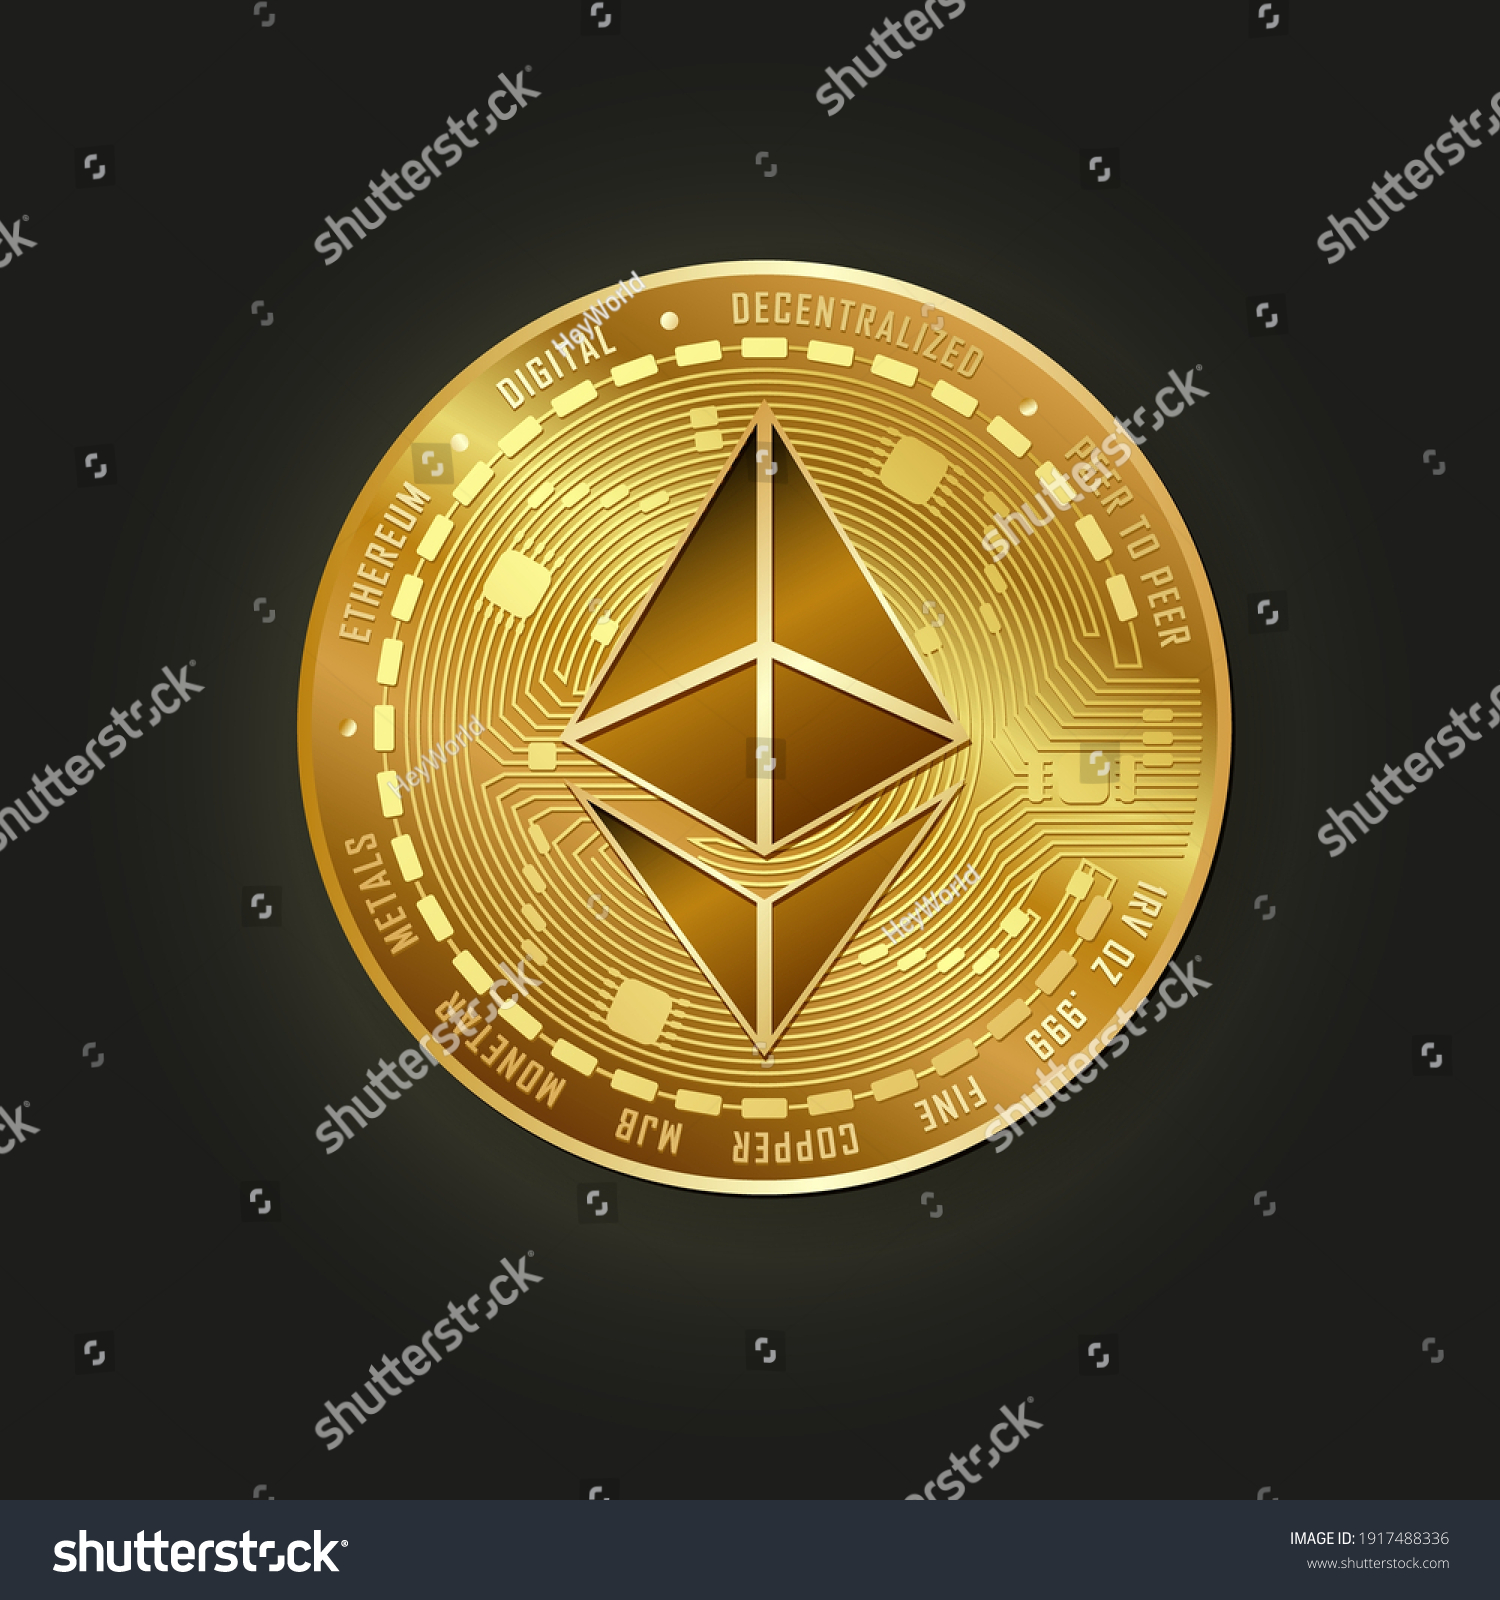 ethereum Admission charge usd Caesarian delivery